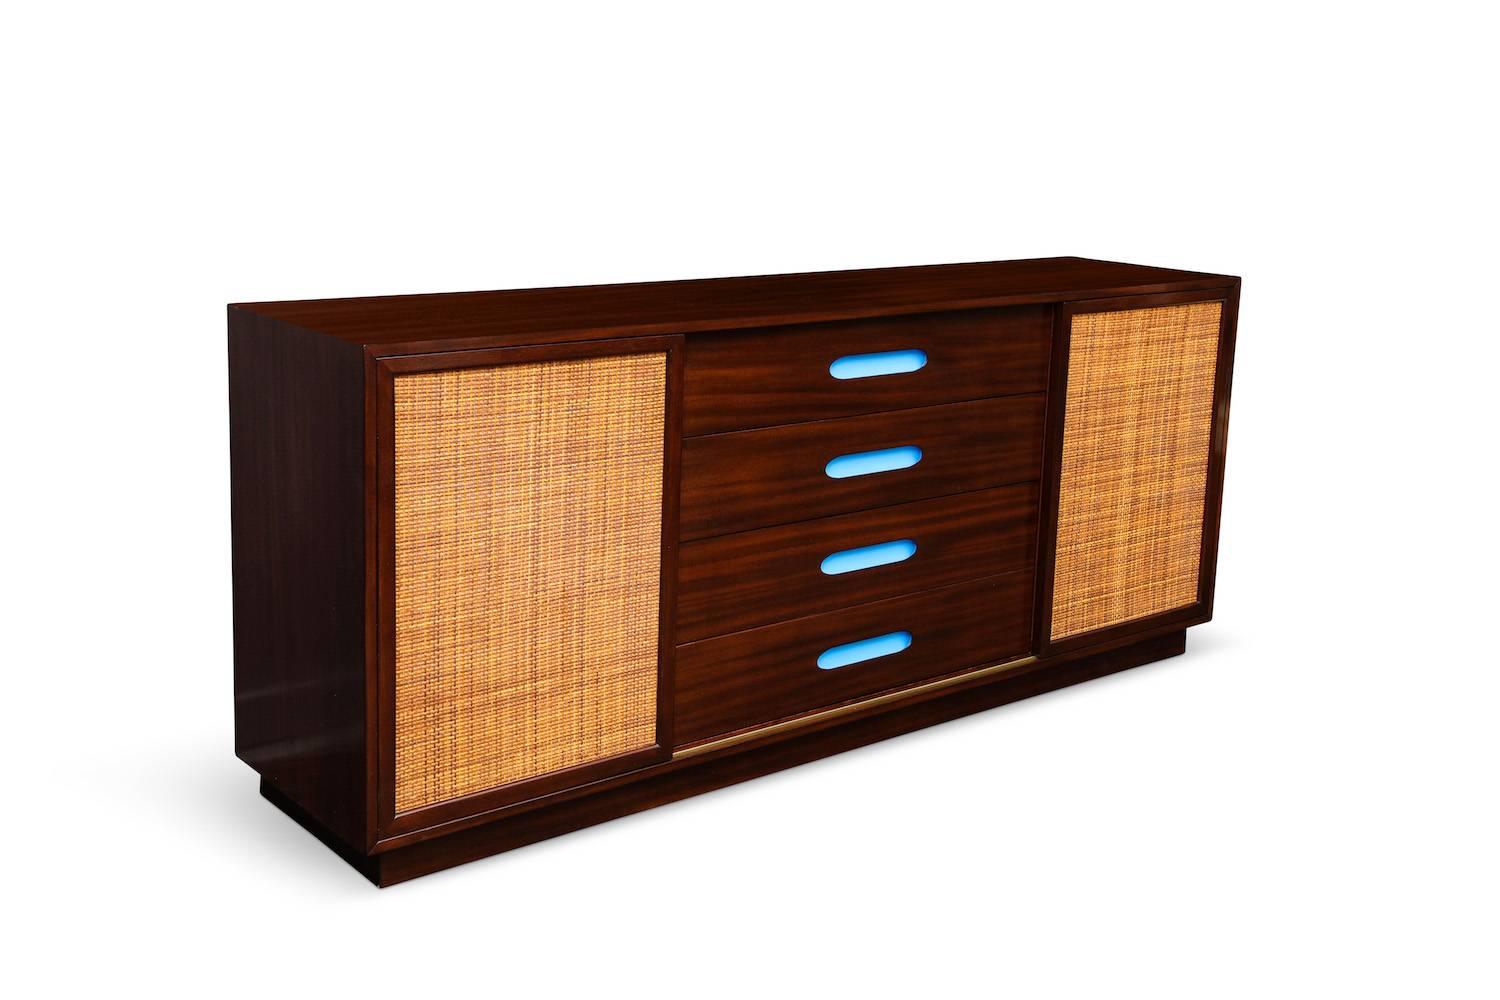 Unusual storage cabinet by Harvey Probber.
Dark stained mahogany cabinet with sliding rattan doors and four centre drawers. Each rattan door slides to reveal a unique bank of drawers, one set lined with cork. Centre drawers with inset pulls painted